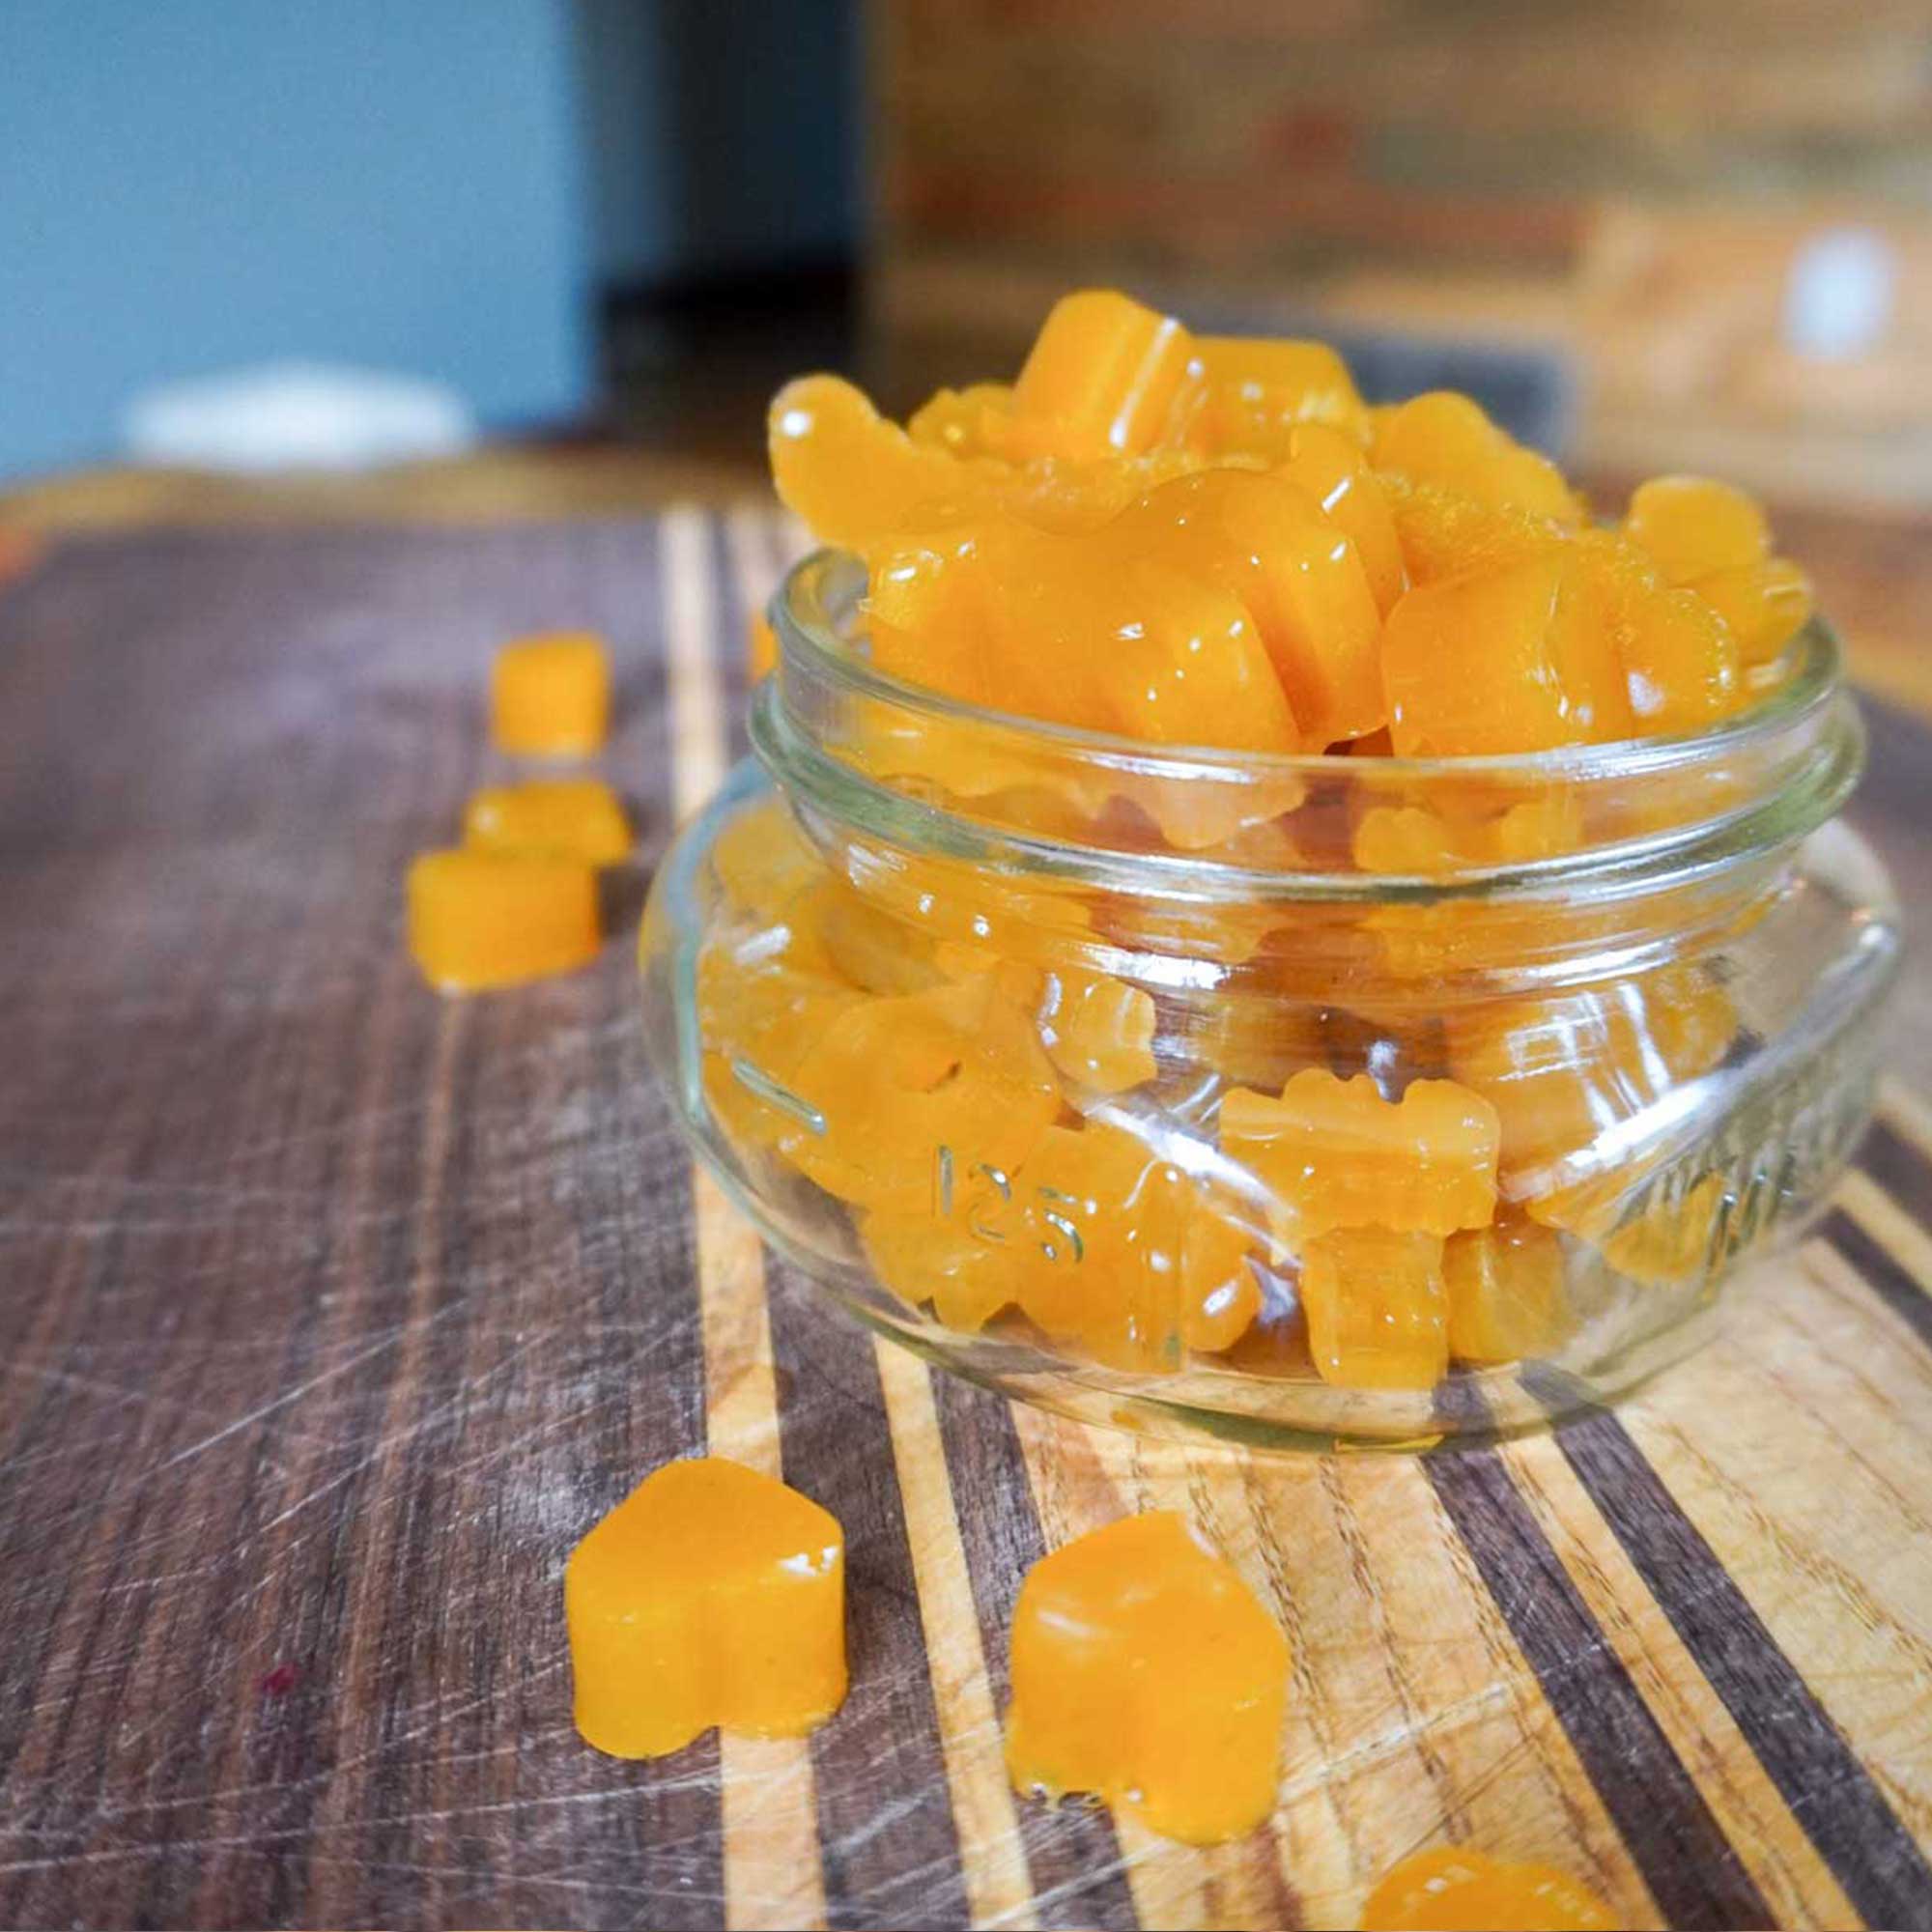 homemade 3 ingredient fruit gummies in a glass jar on a homemade wood cutting board